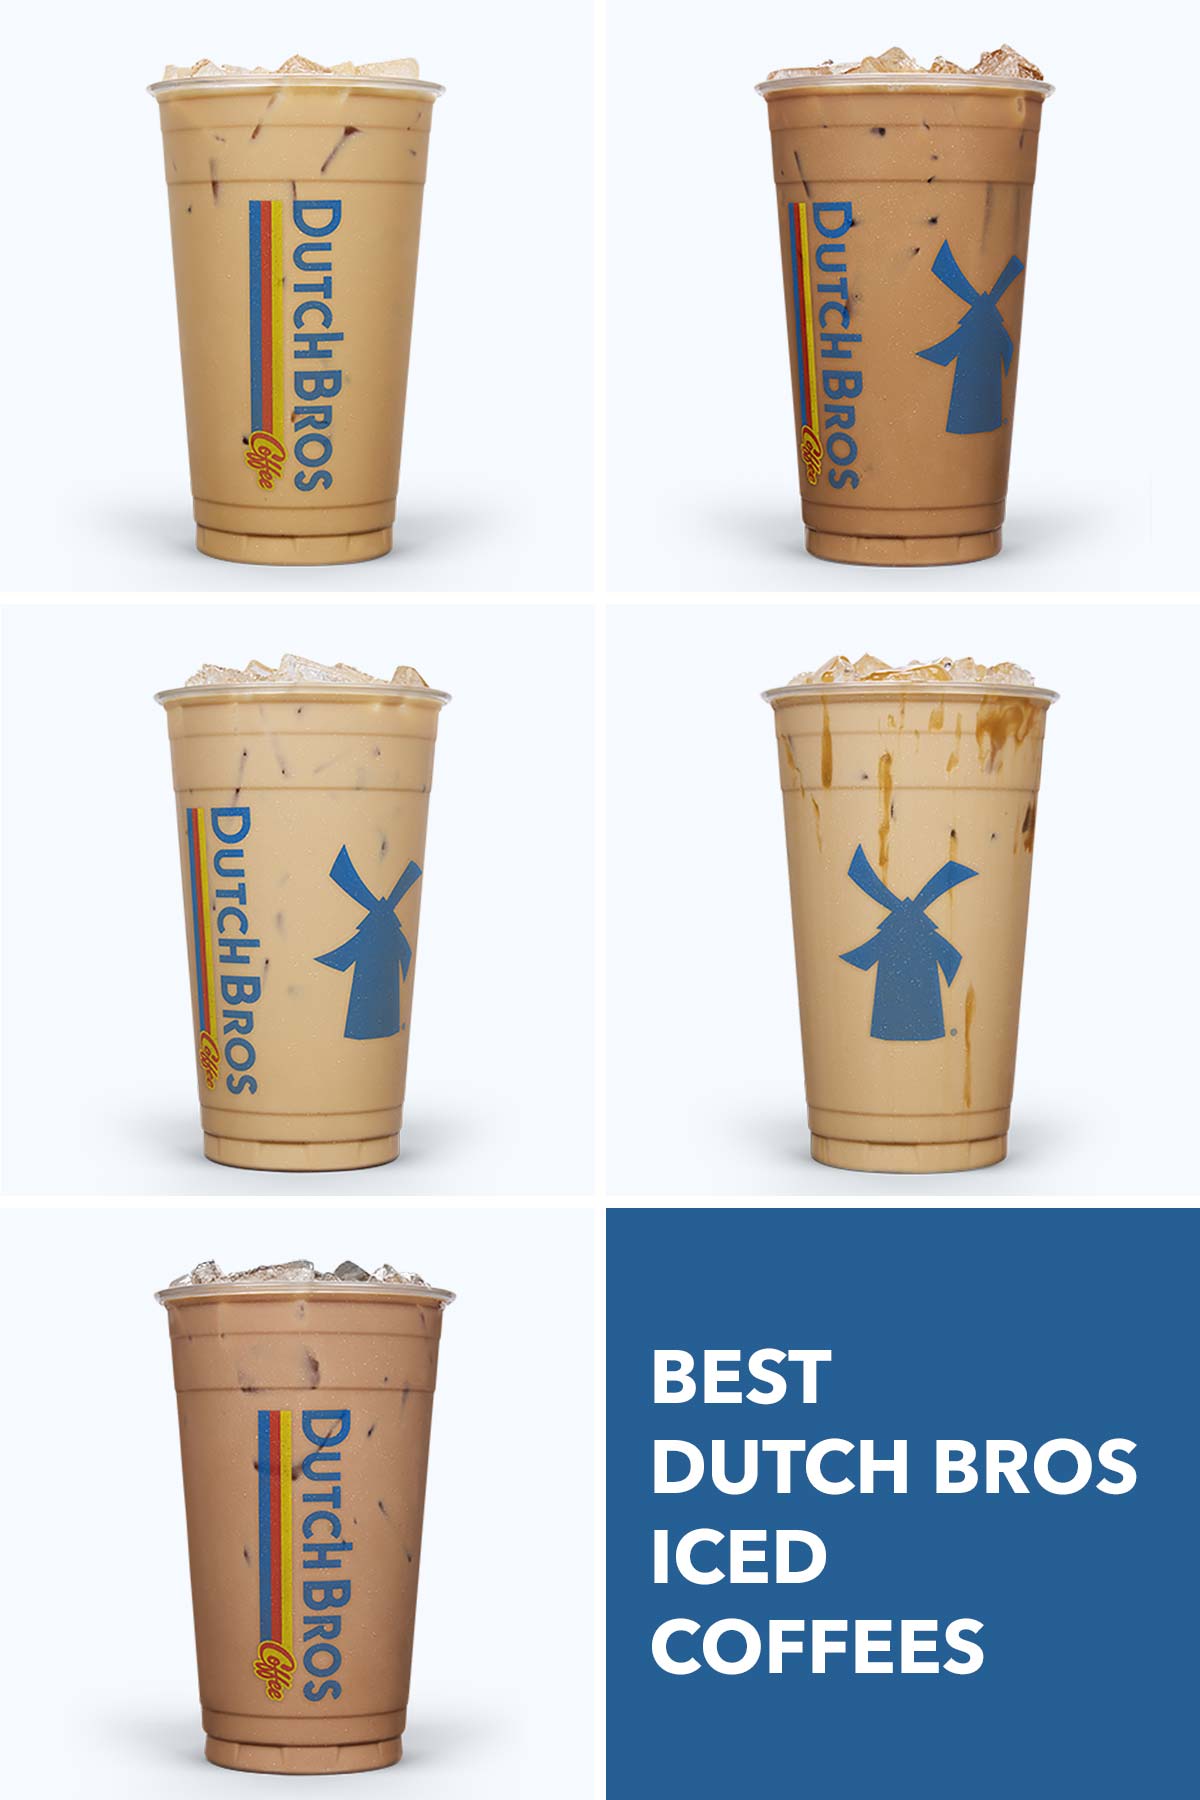 Best Dutch Bros Iced Coffees photo collage of several iced coffees in Dutch Bros cups.